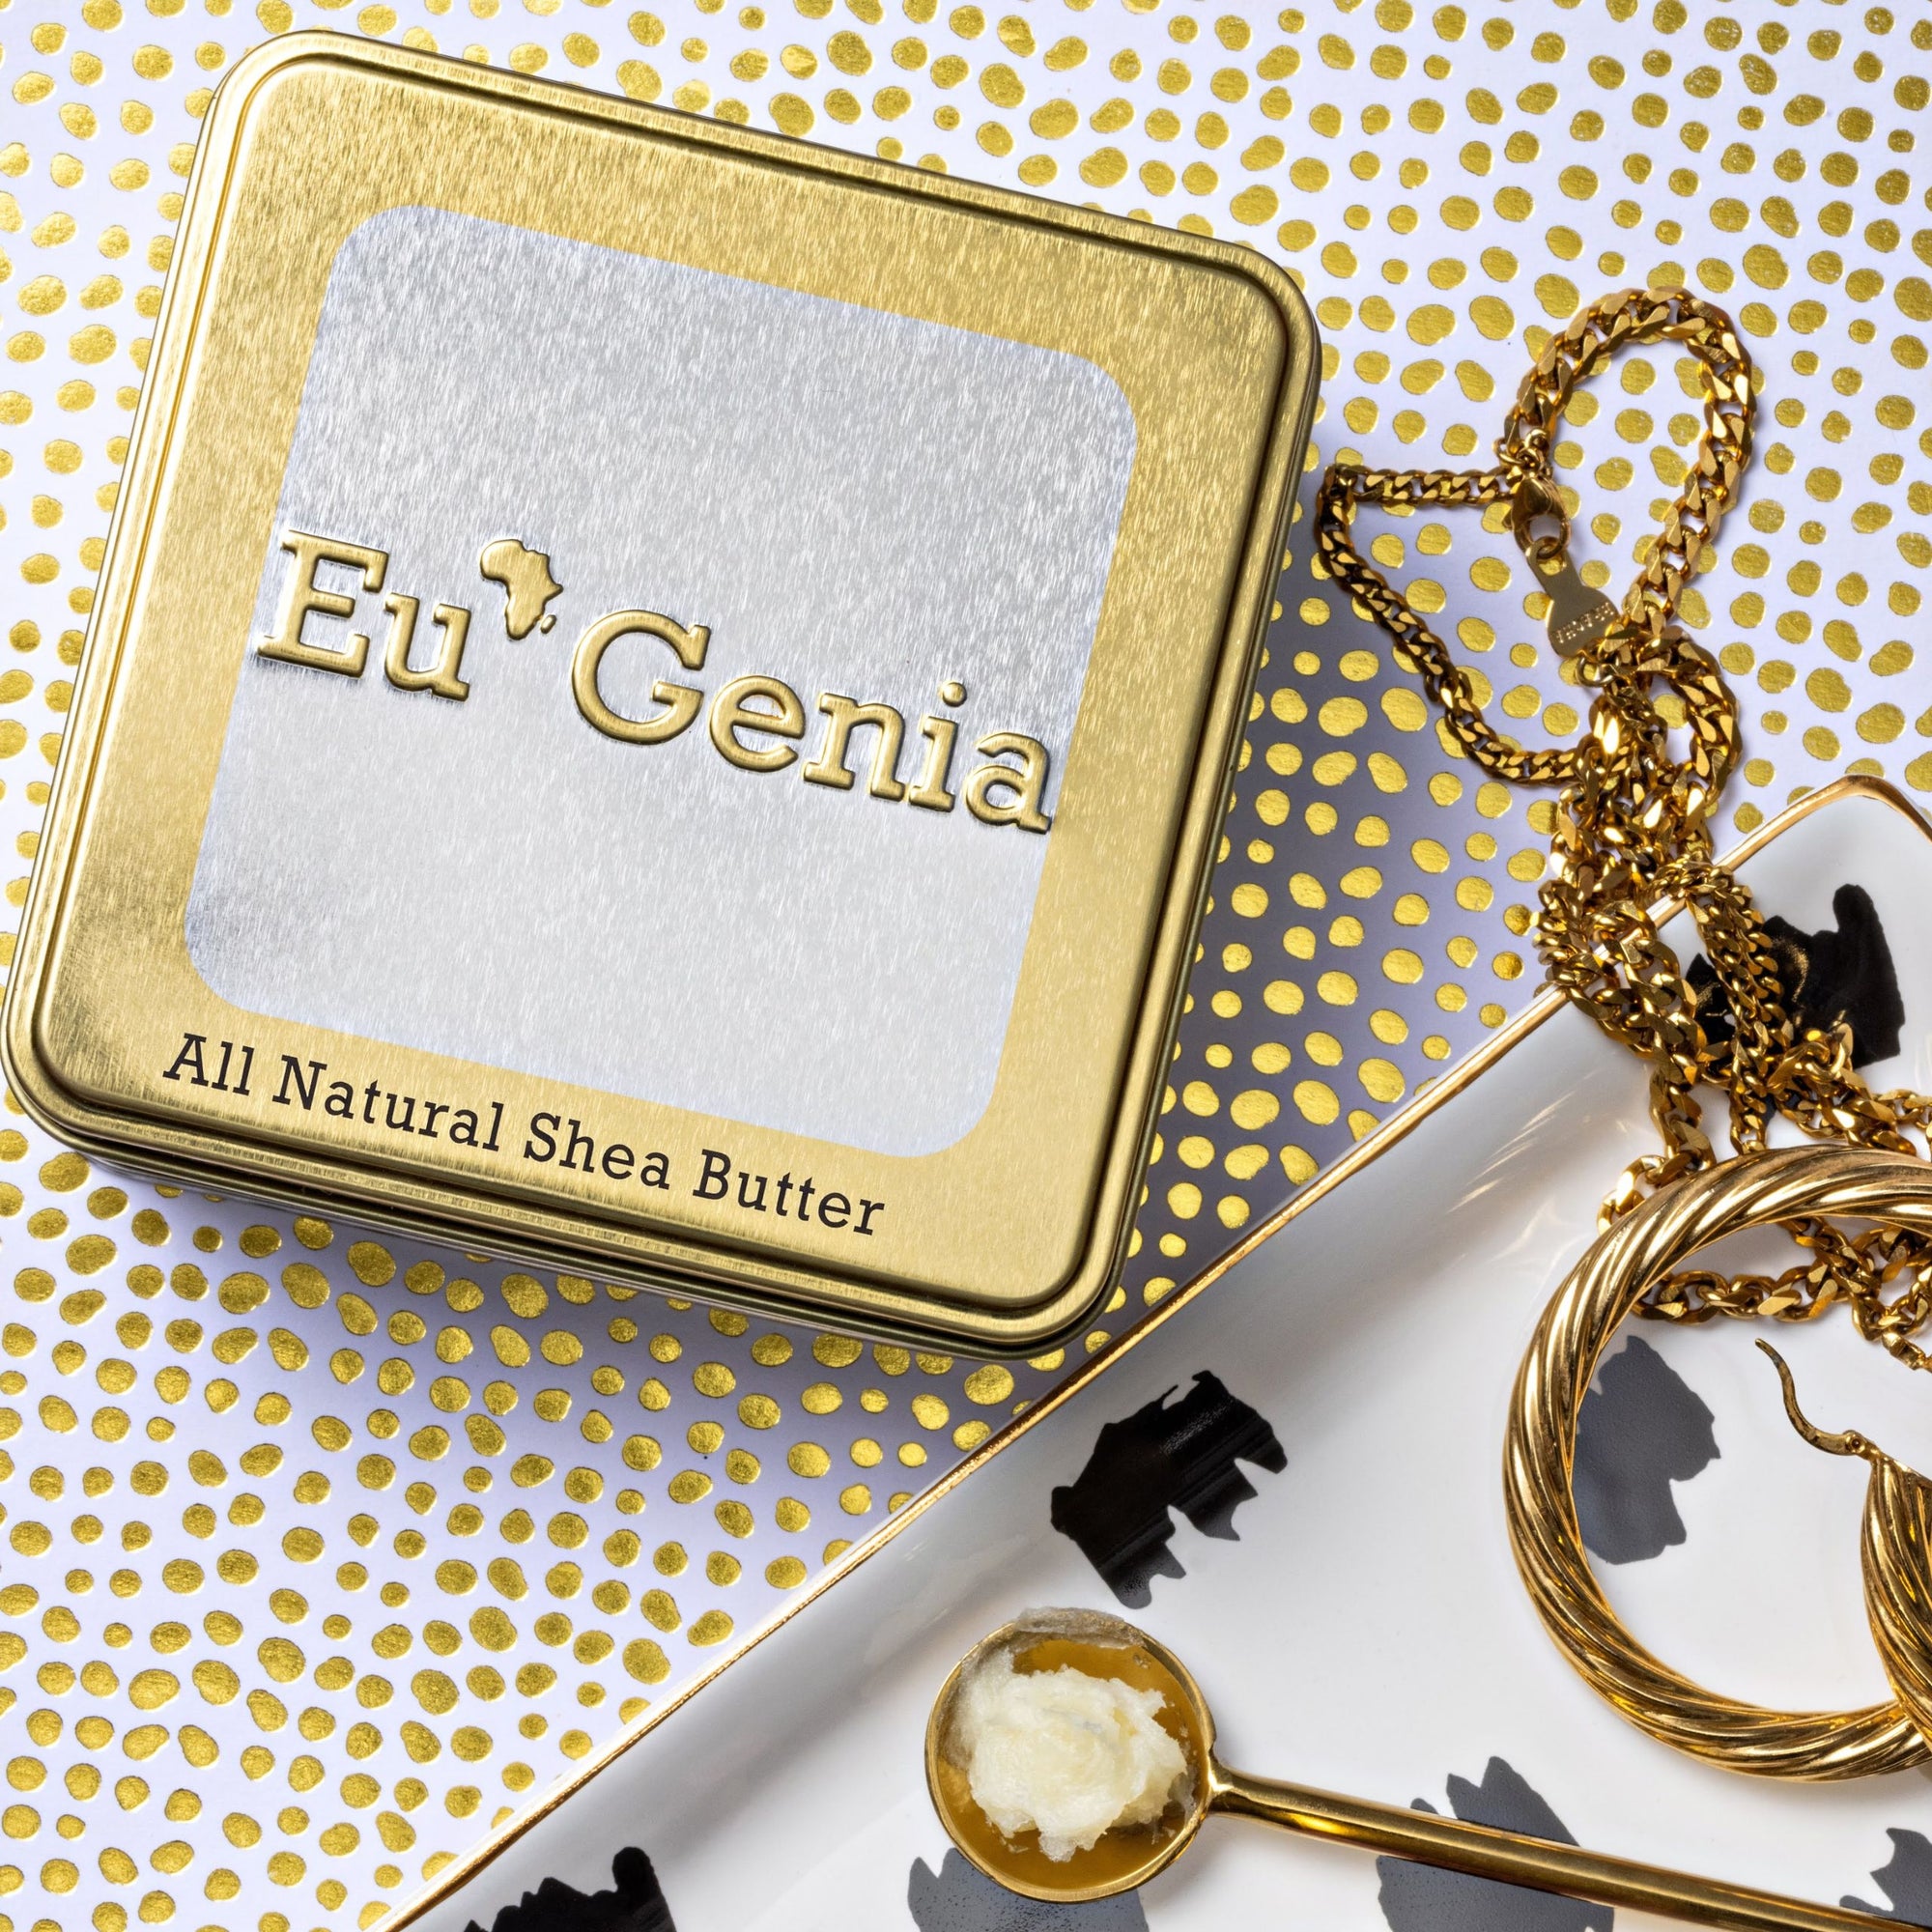 Gold Tin with text that reads "Eu'Genia All Natural Shea Butter". A white and gold background with a tray of gold jewelry and a gold spoon of shea butter sit next to the tin.